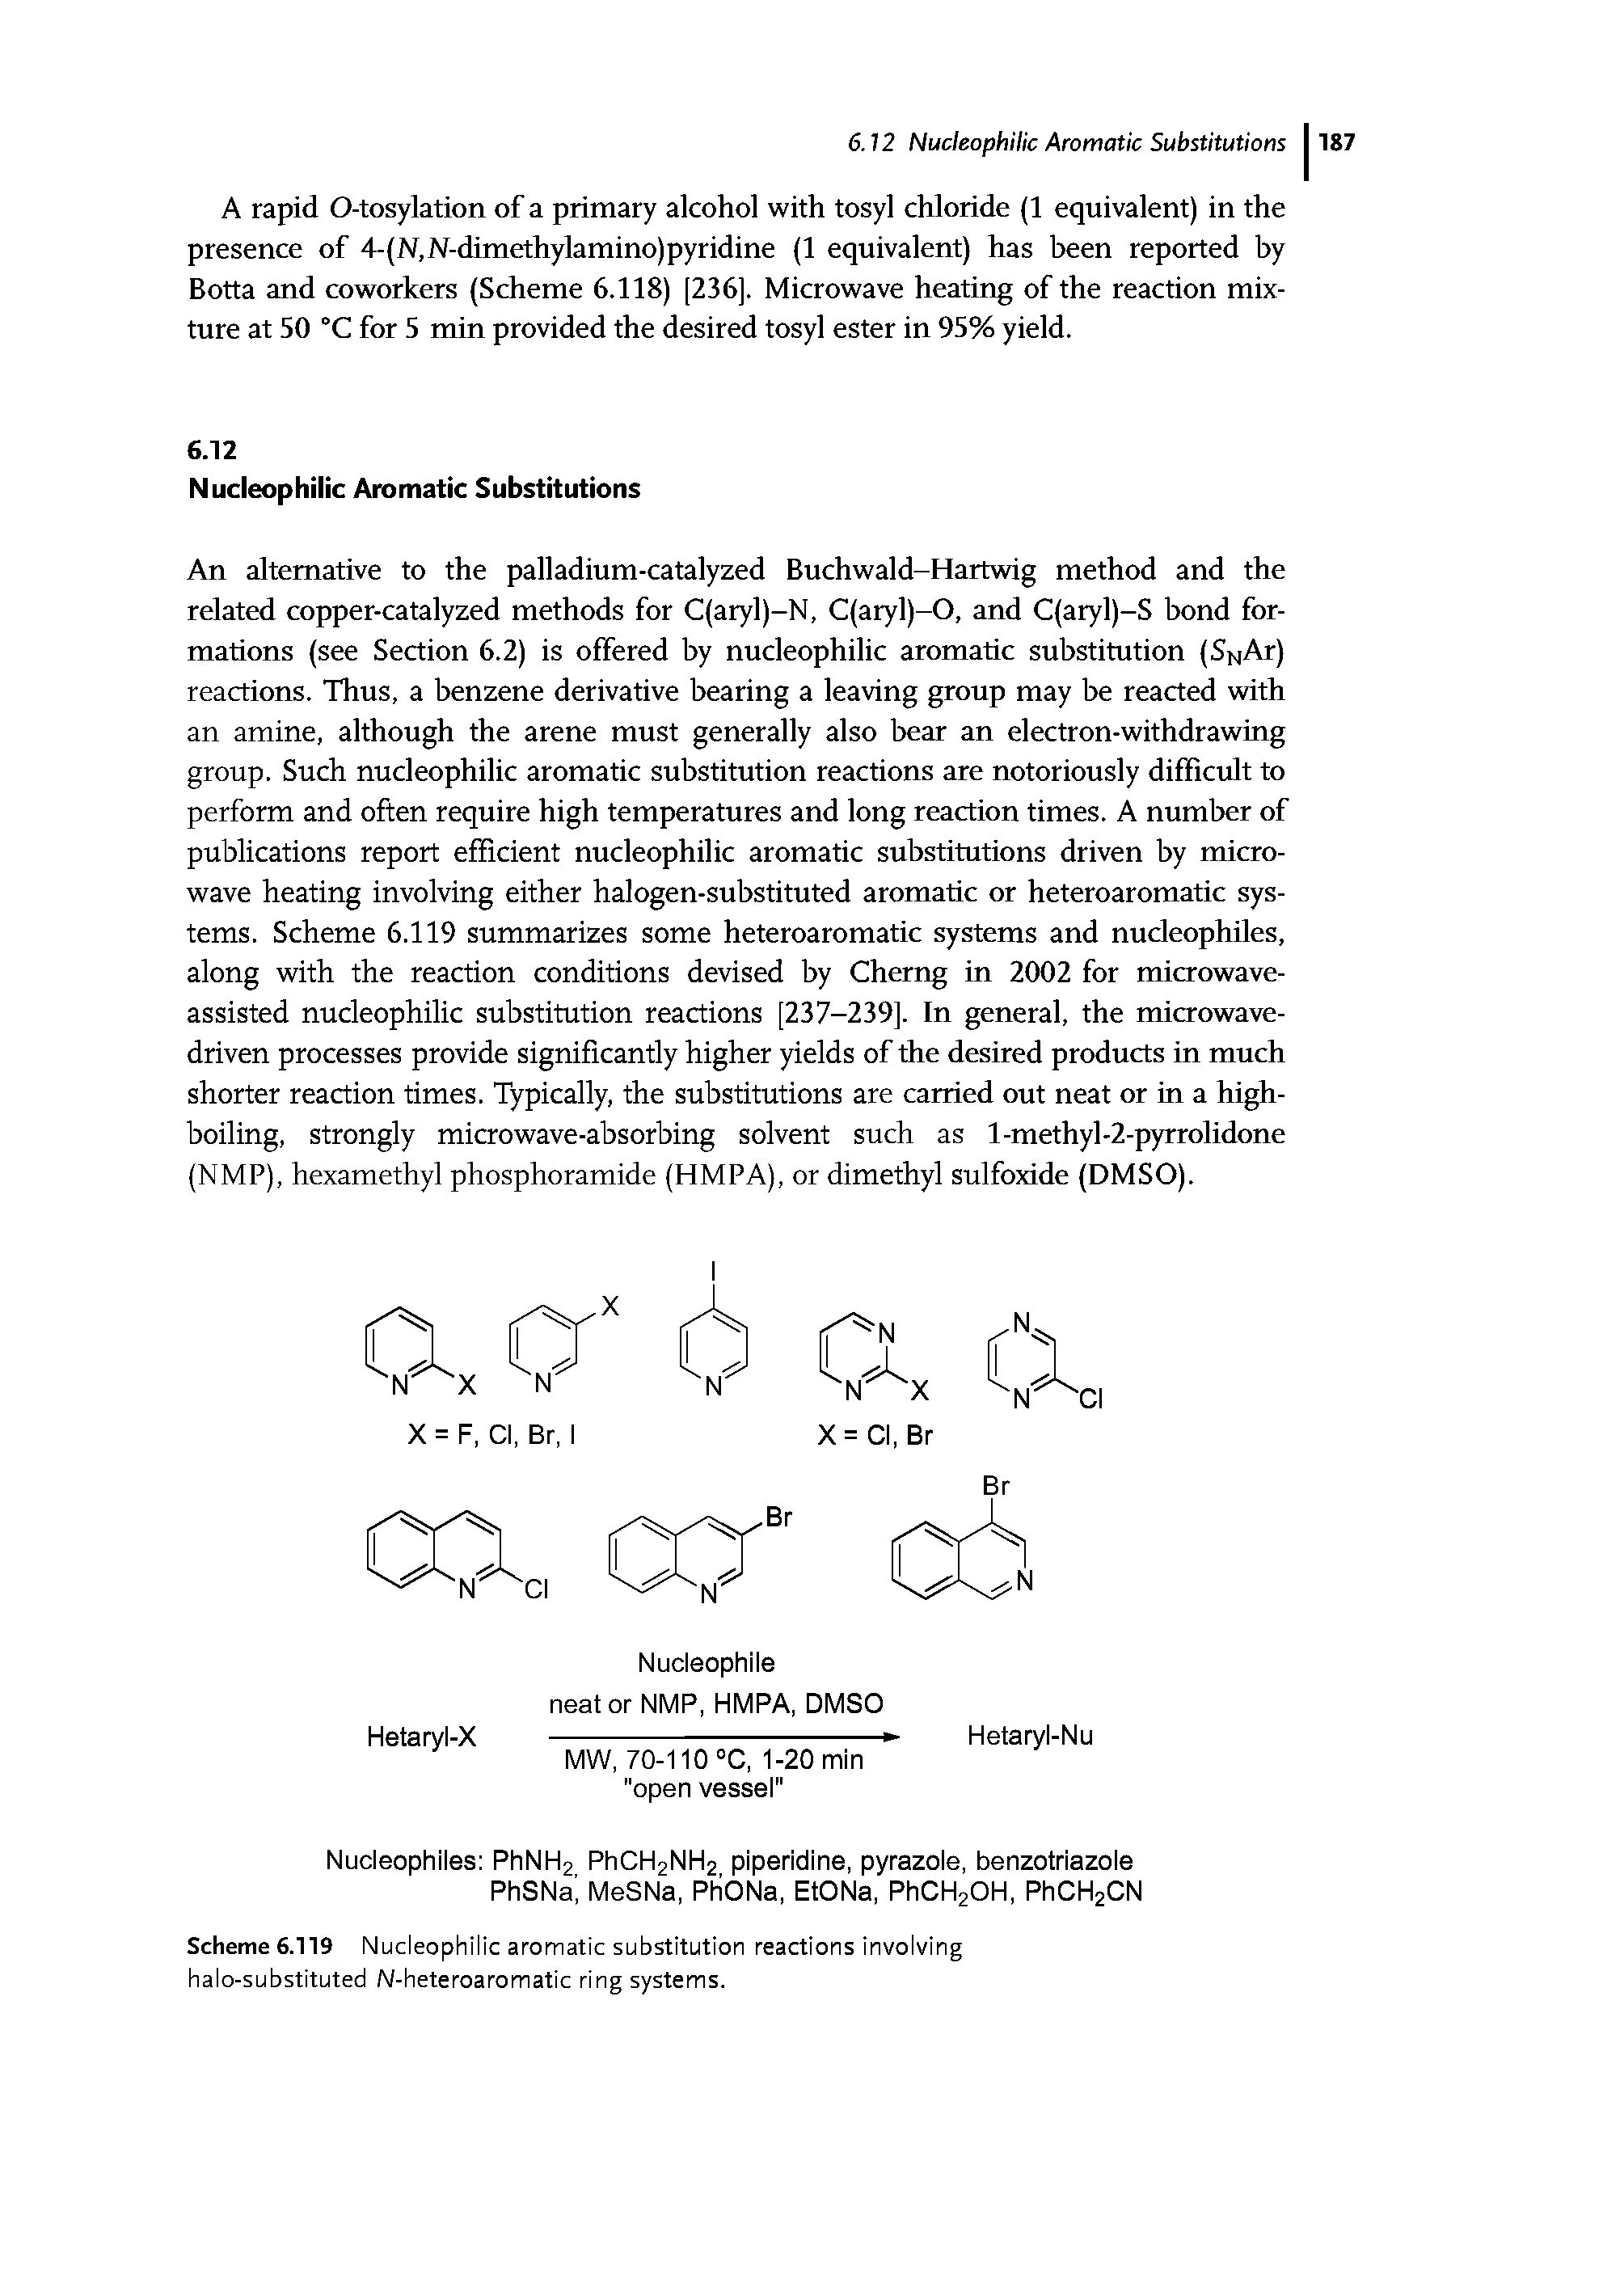 Scheme 6.119 Nucleophilic aromatic substitution reactions involving halo-substituted N-heteroaromatic ring systems.